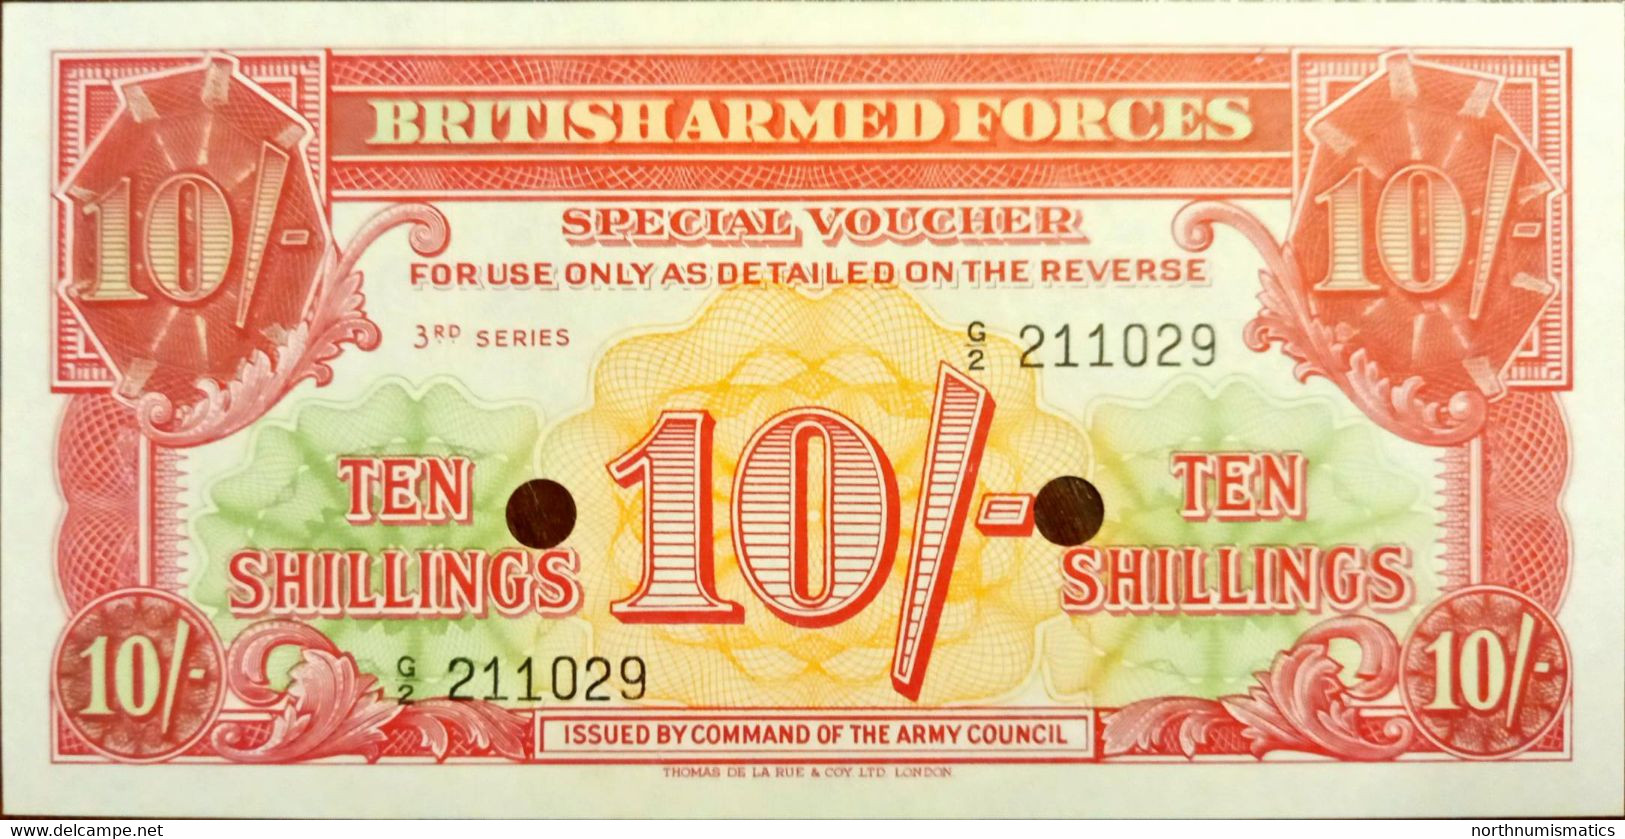 Great Britain British Armed Forces Special Vouchers 10 Shillings 3rd Series Unc - British Armed Forces & Special Vouchers